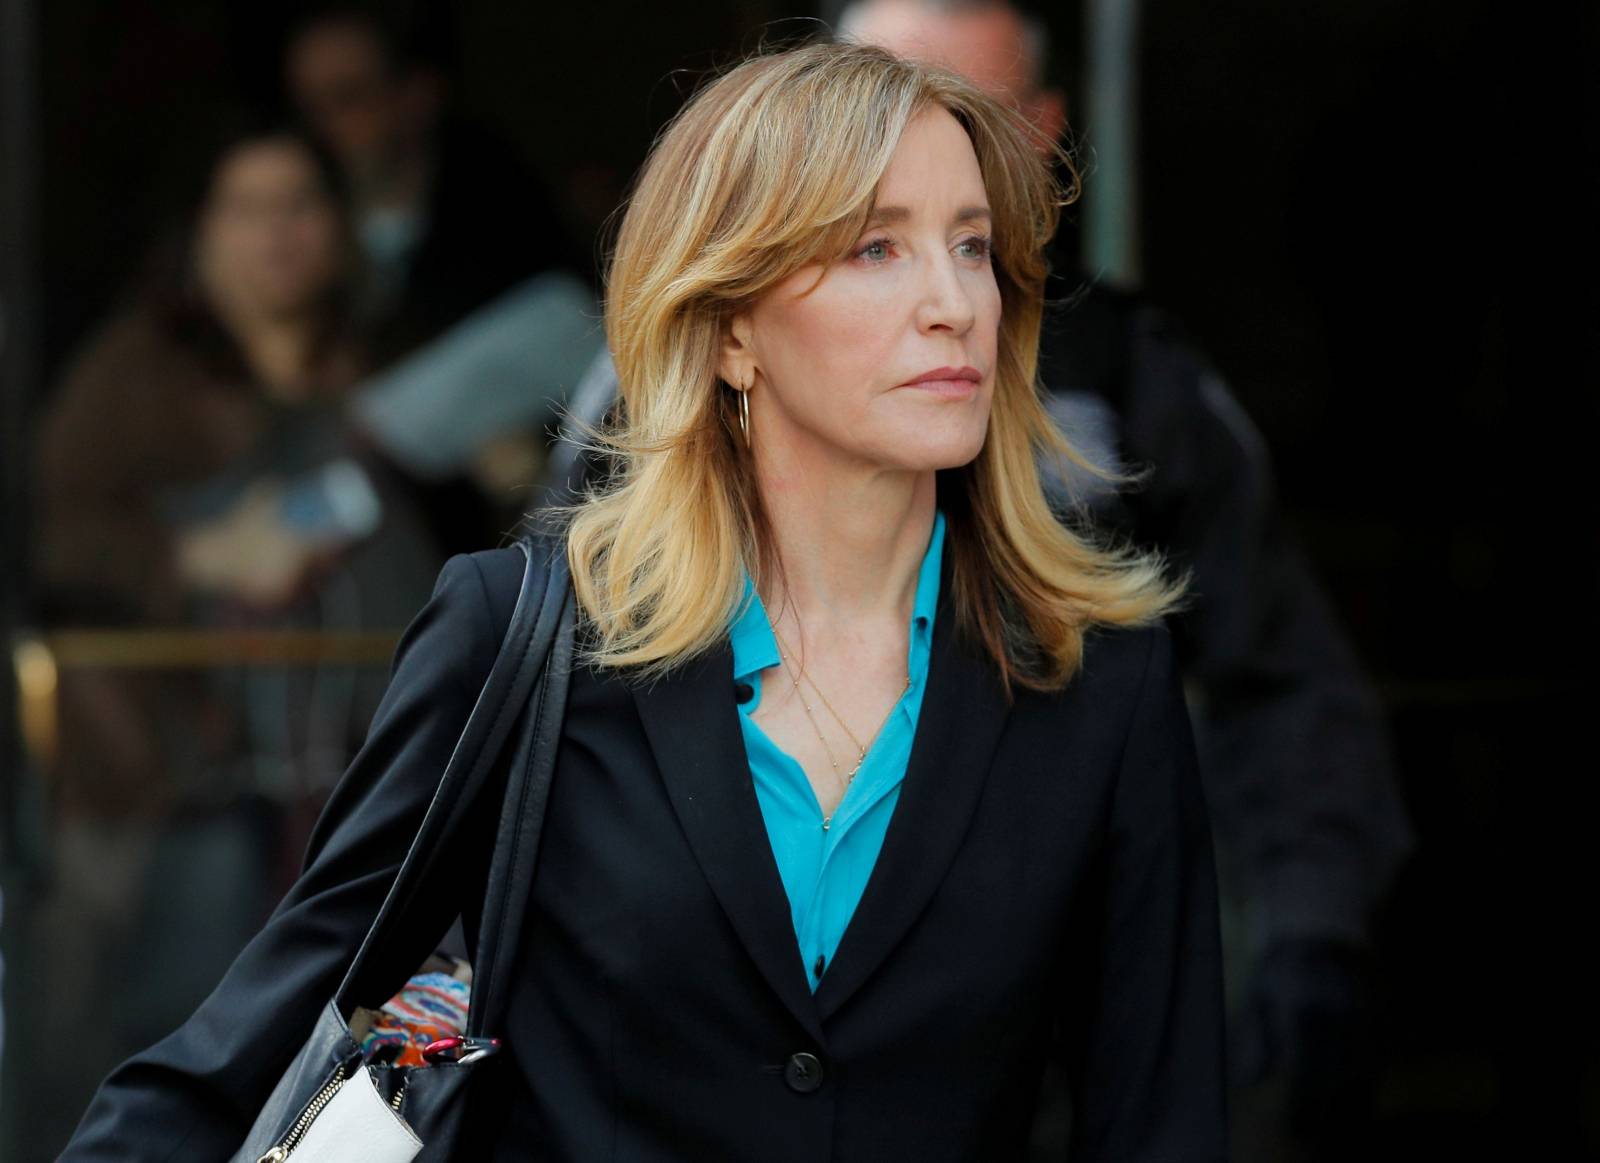 FILE PHOTO: Actor Felicity Huffman, facing charges in a nationwide college admissions cheating scheme, leave federal court in Boston